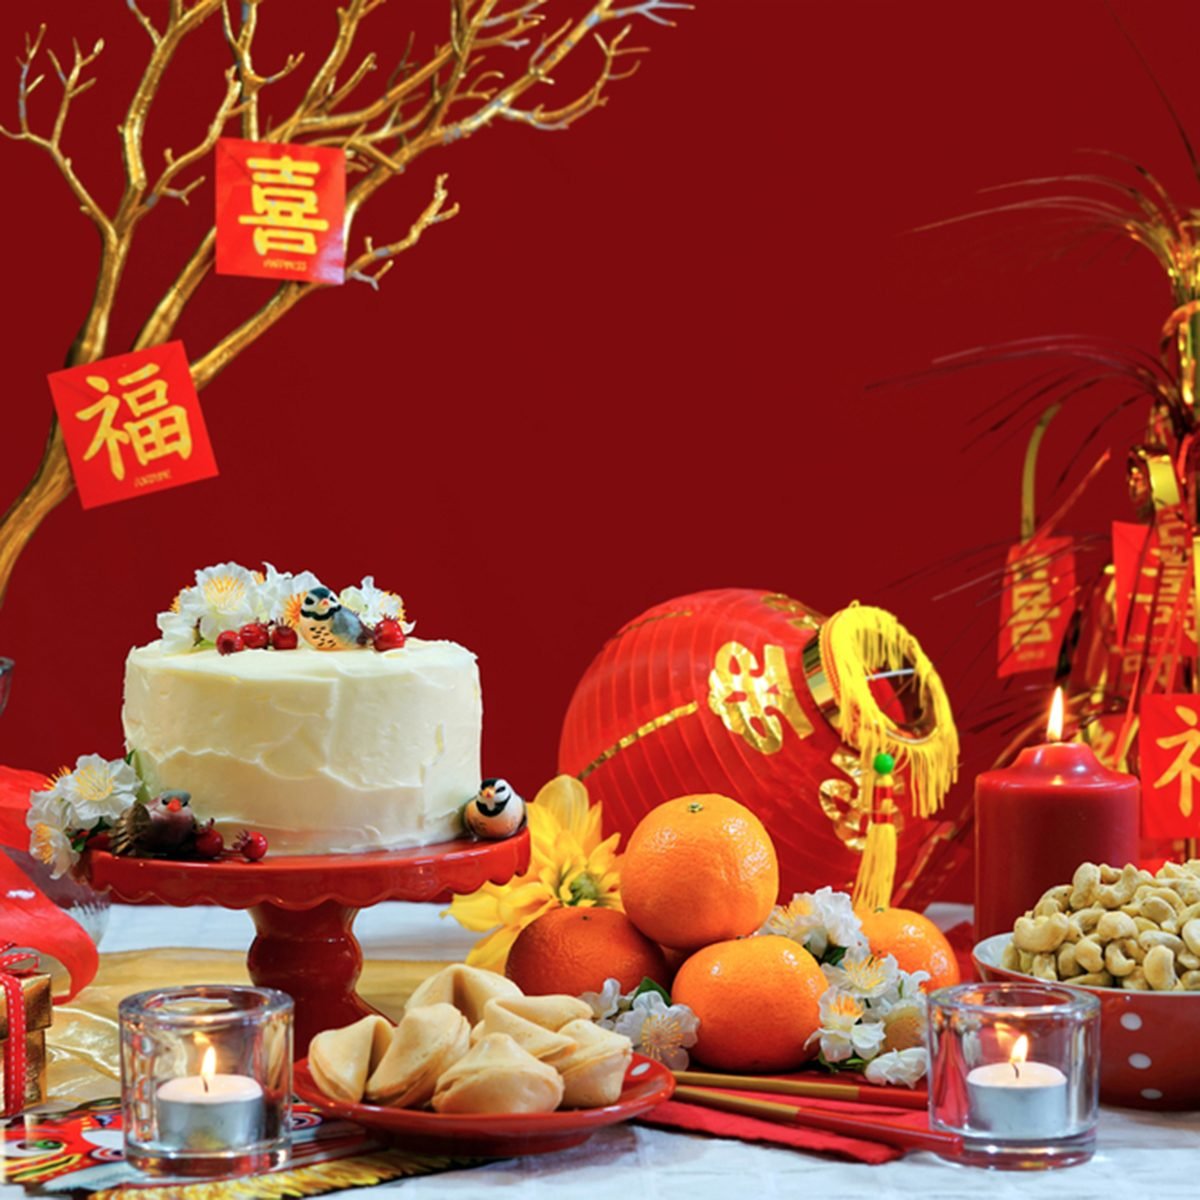 Traditional food for thought for Lunar New Year's Eve dinner